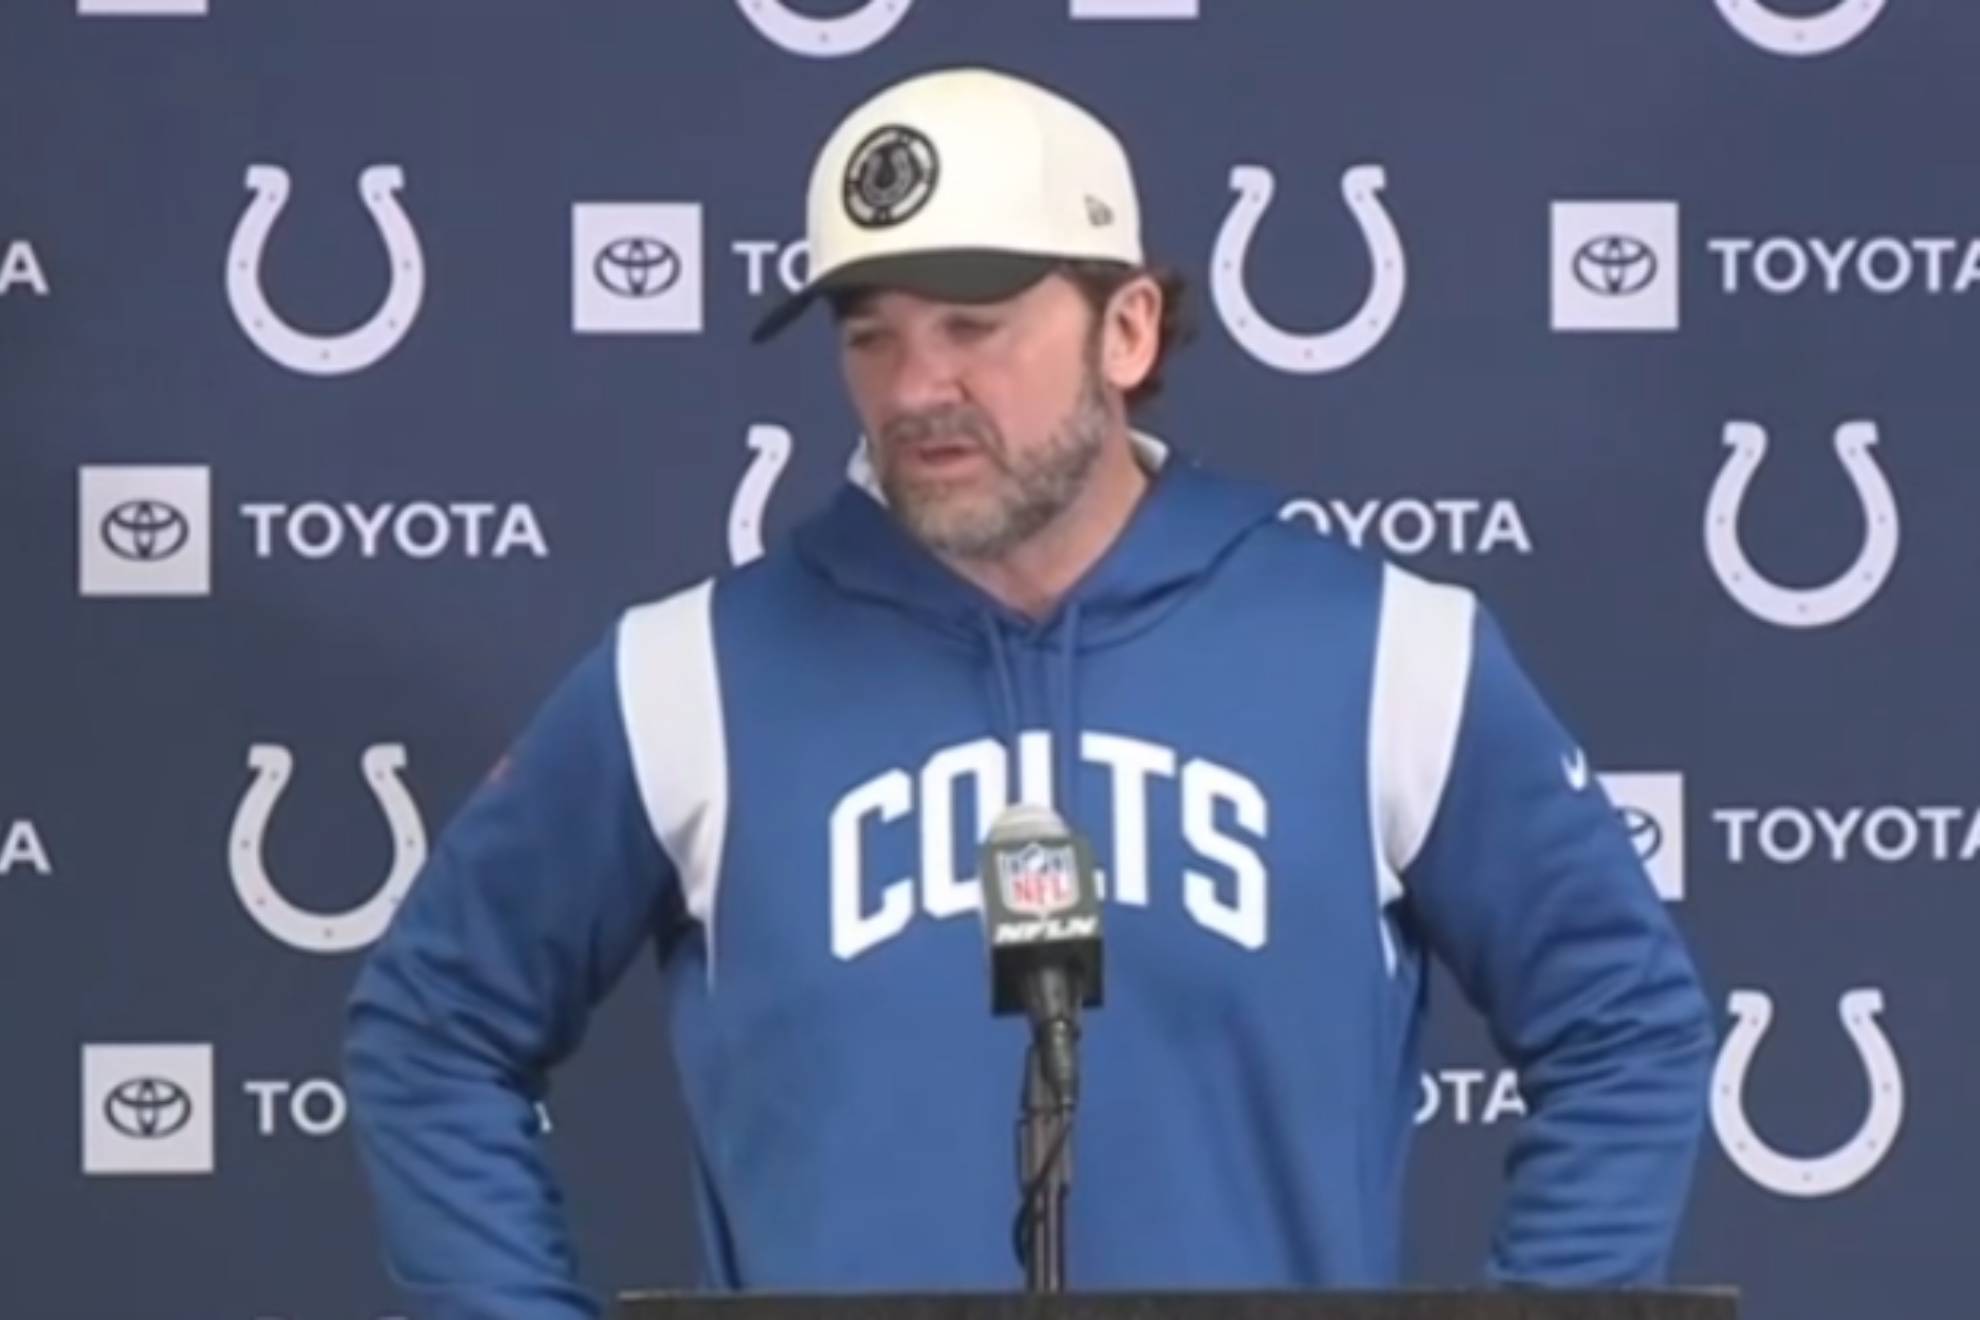 "Plenty of blame to go around" Colts coach Saturday on catastrophic collapse